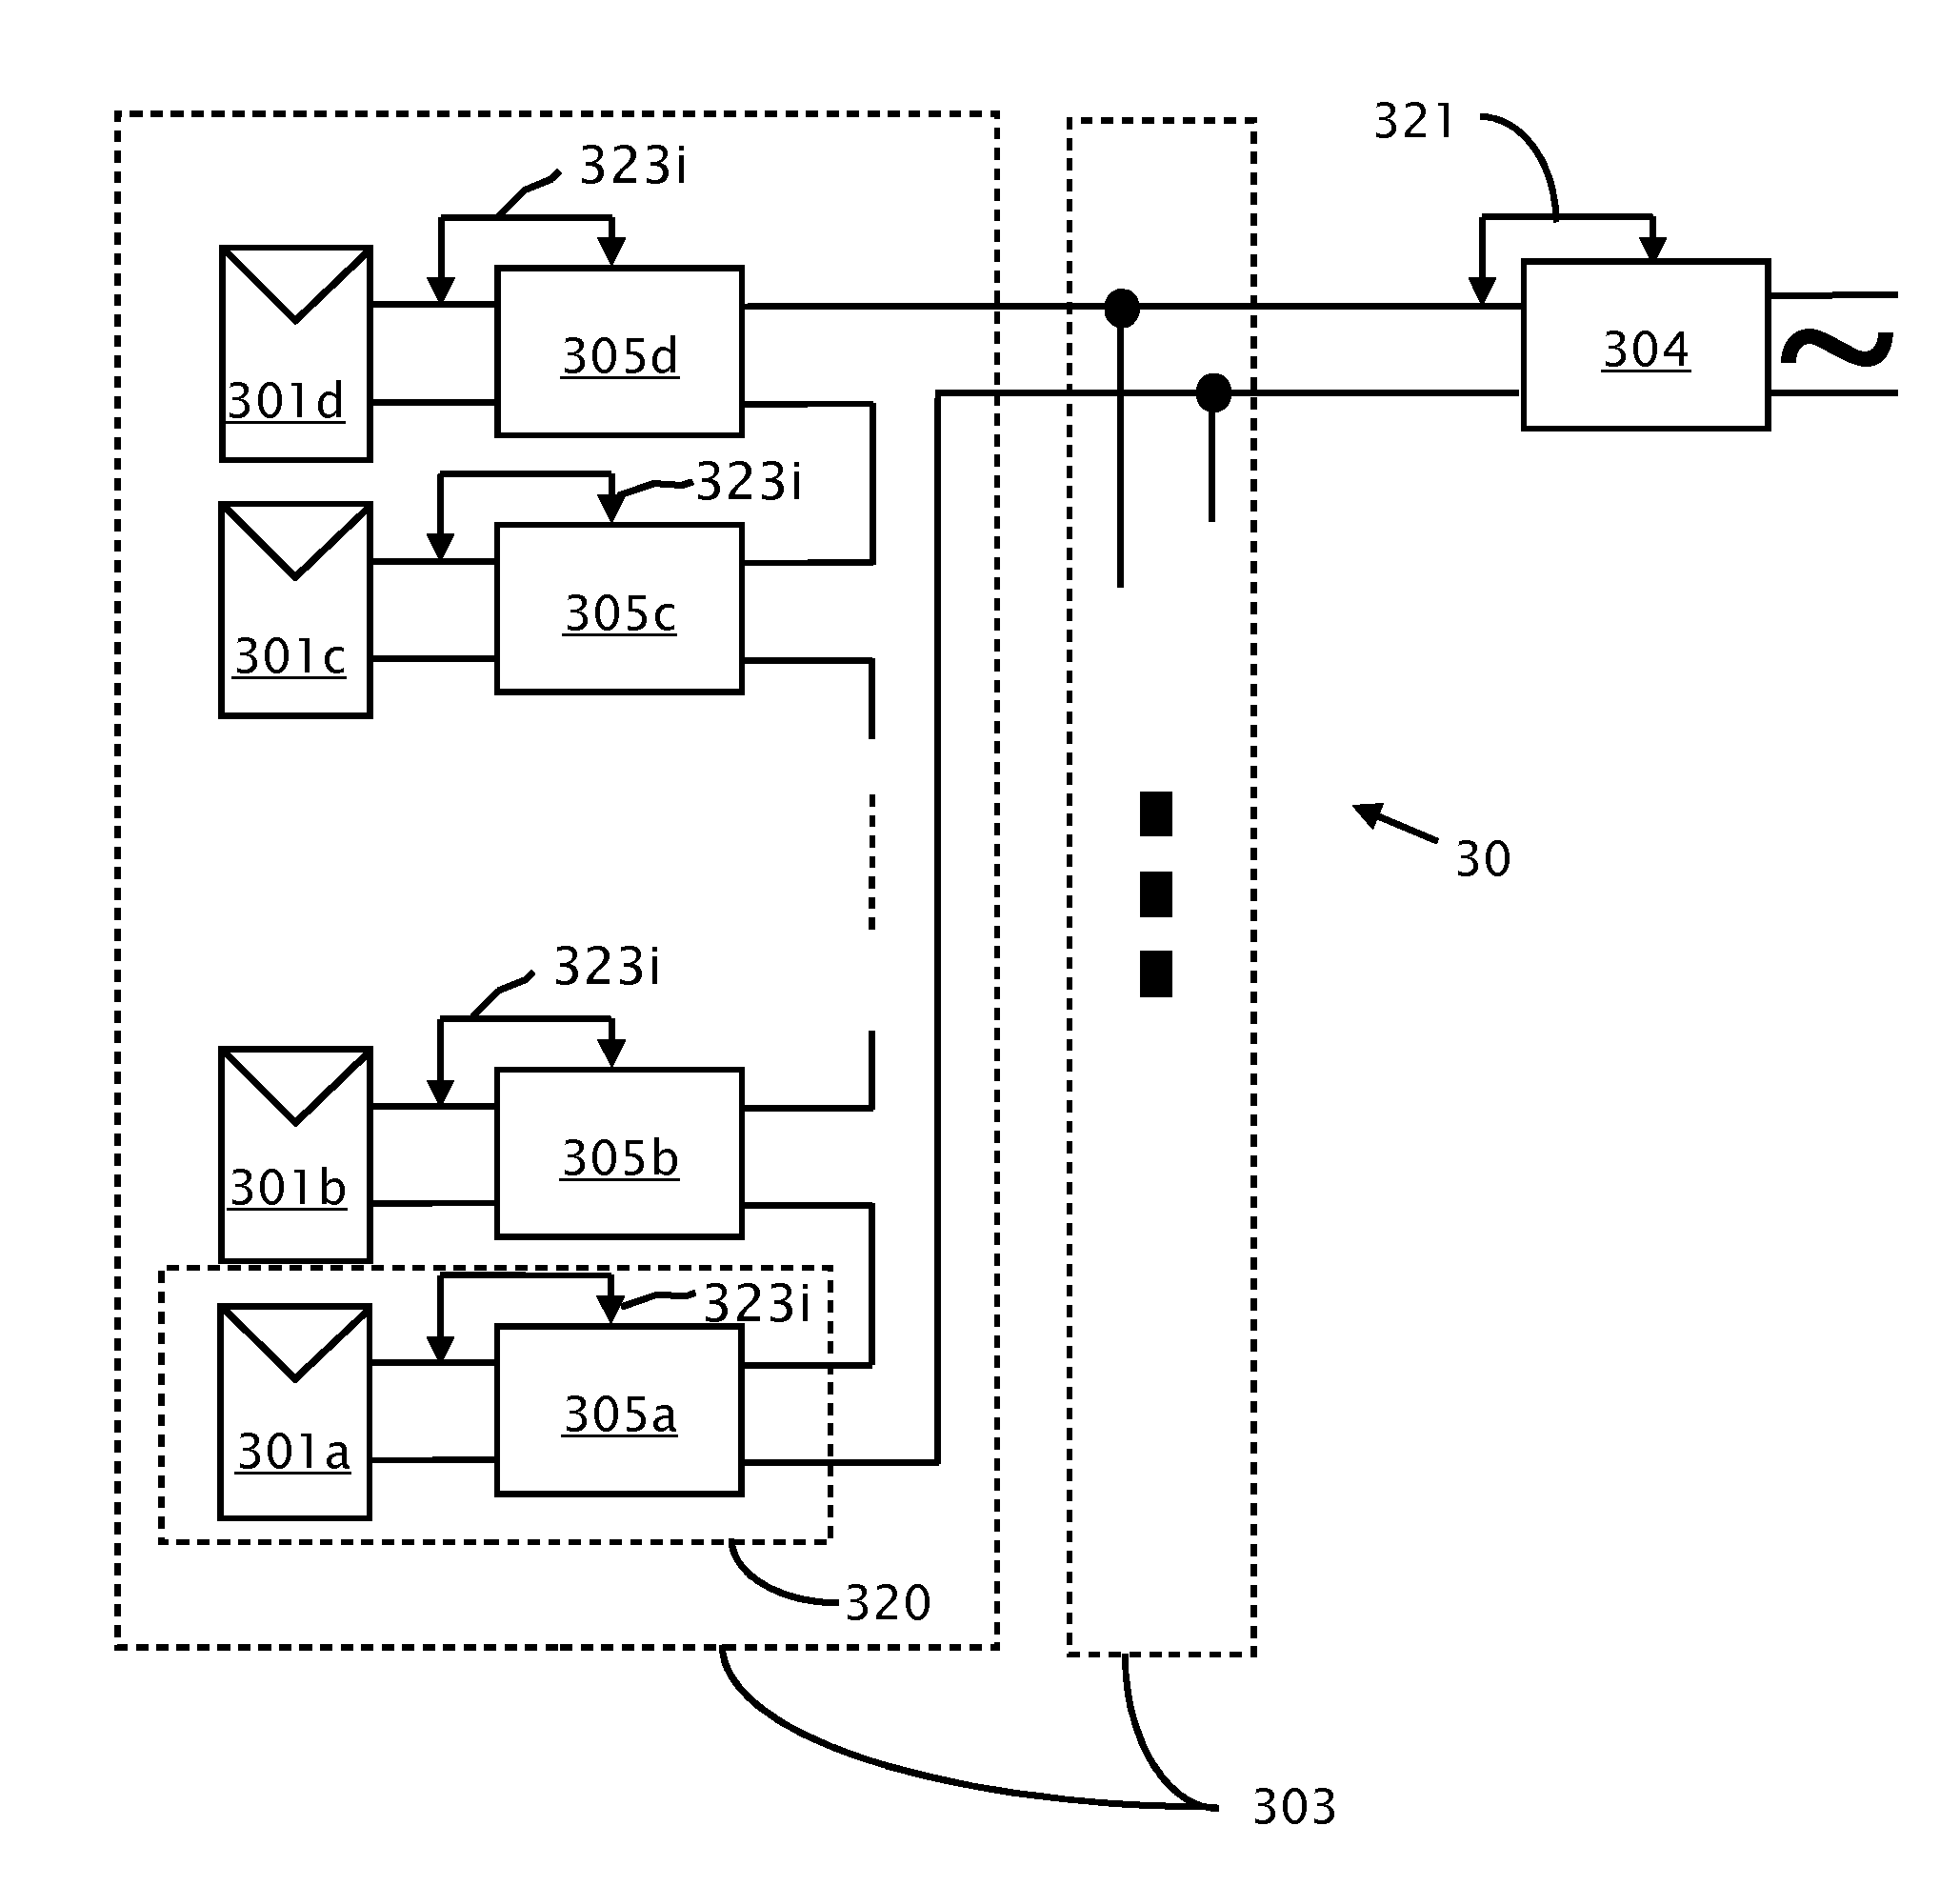 Distributed power system using direct current power sources